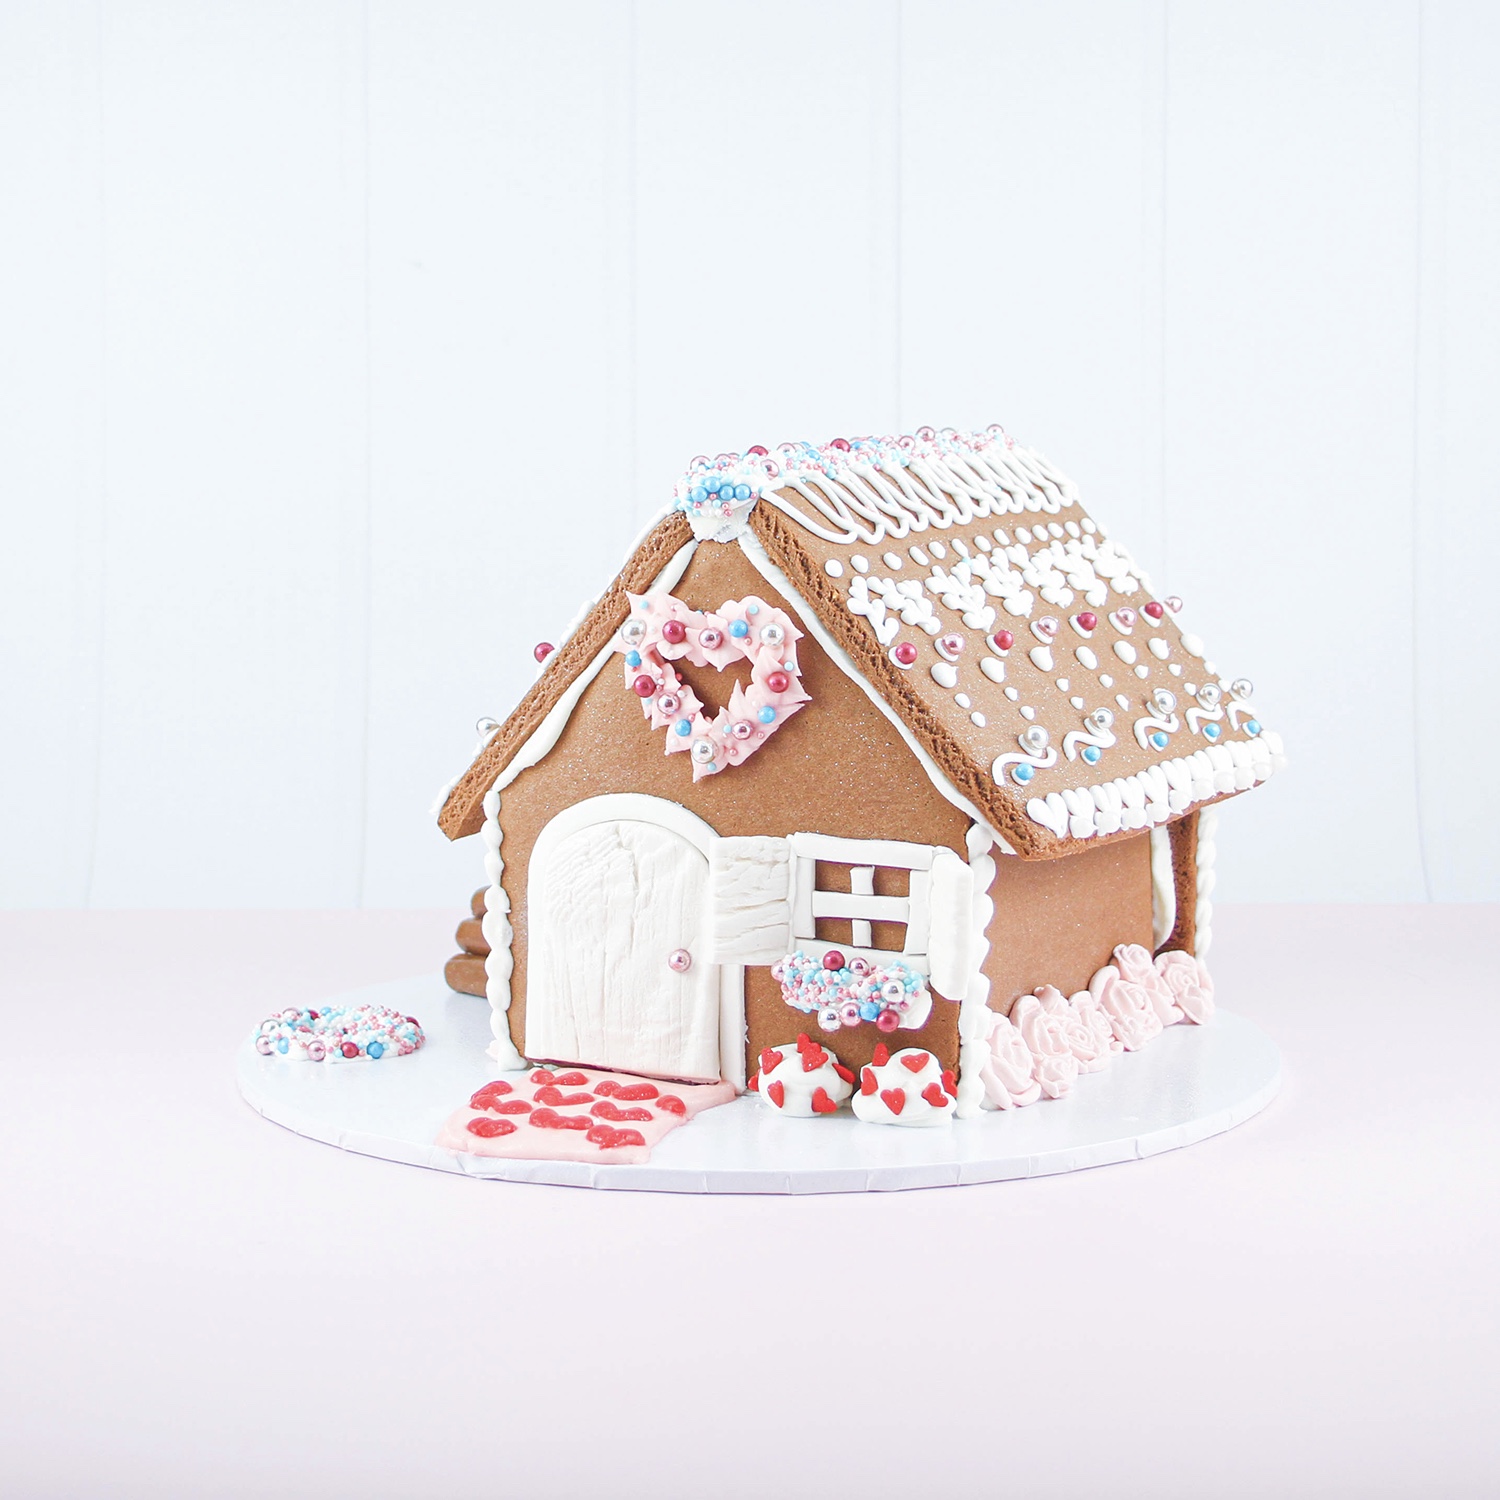 Front side right angle of valentine gingerbread house piped with royal icing accents of hearts , flowers, window trim and flowerbox, sidewalk of heart shaped sprinkles and a roof adorned with royal icing piping and sprinkles